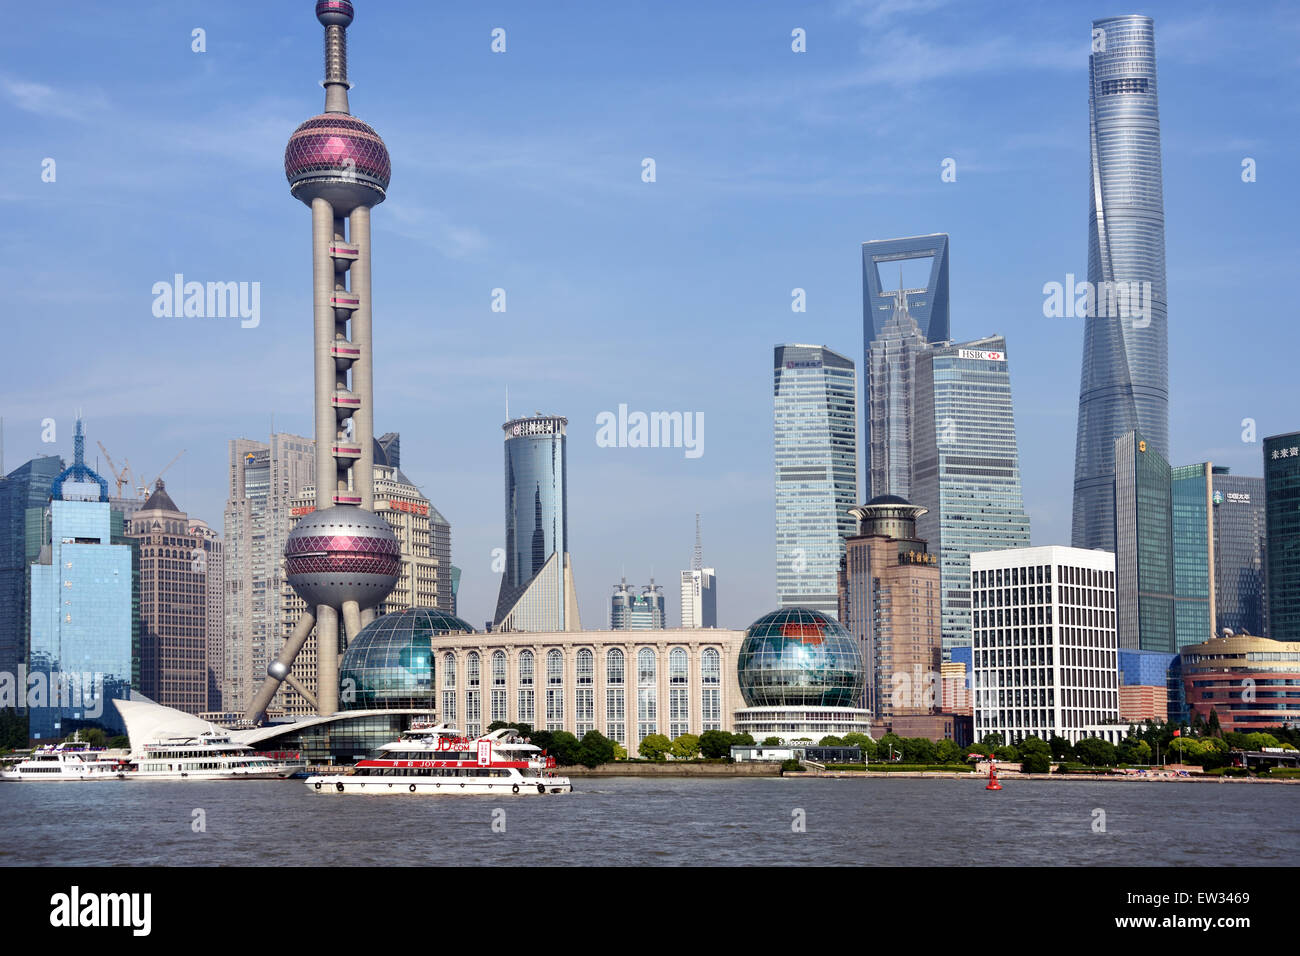 Shanghai Pudong City Skyline Oriental Pearl television tower, Jin Mao Tower, World Financial Center,  Huangpu River China Stock Photo